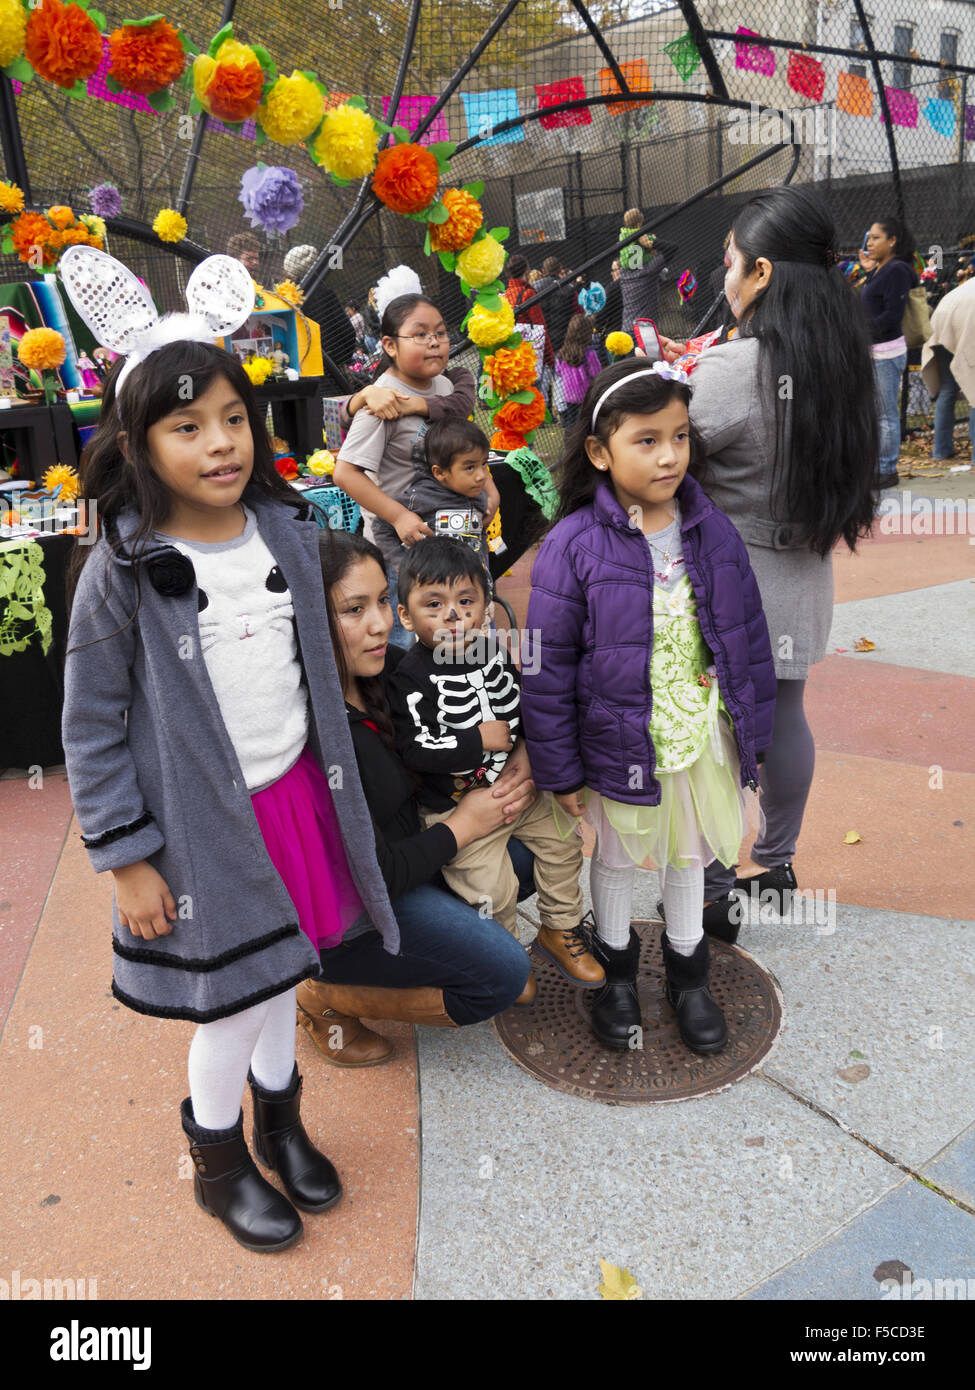 Children pose for photos at Day of the Dead Festival in Brooklyn, NY, Nov.1, 2015. Stock Photo